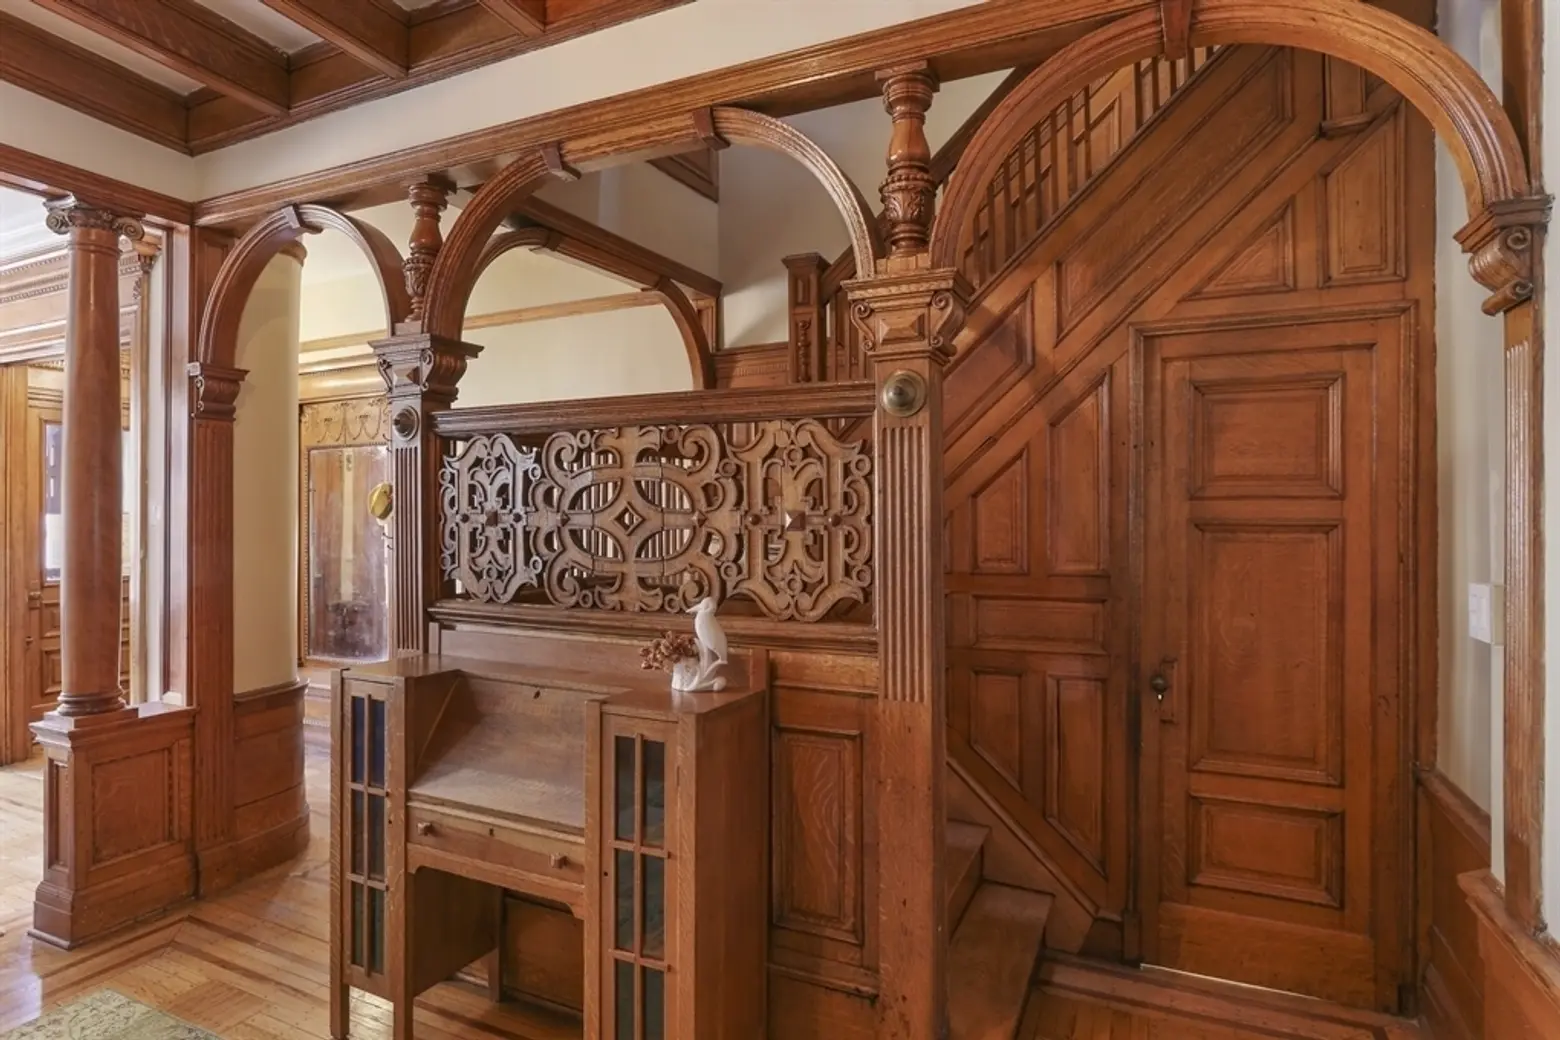 51 Midwood Street, William A.A. Brown, William M. Miller, grand center stair with arches and chinoiserie lattice work